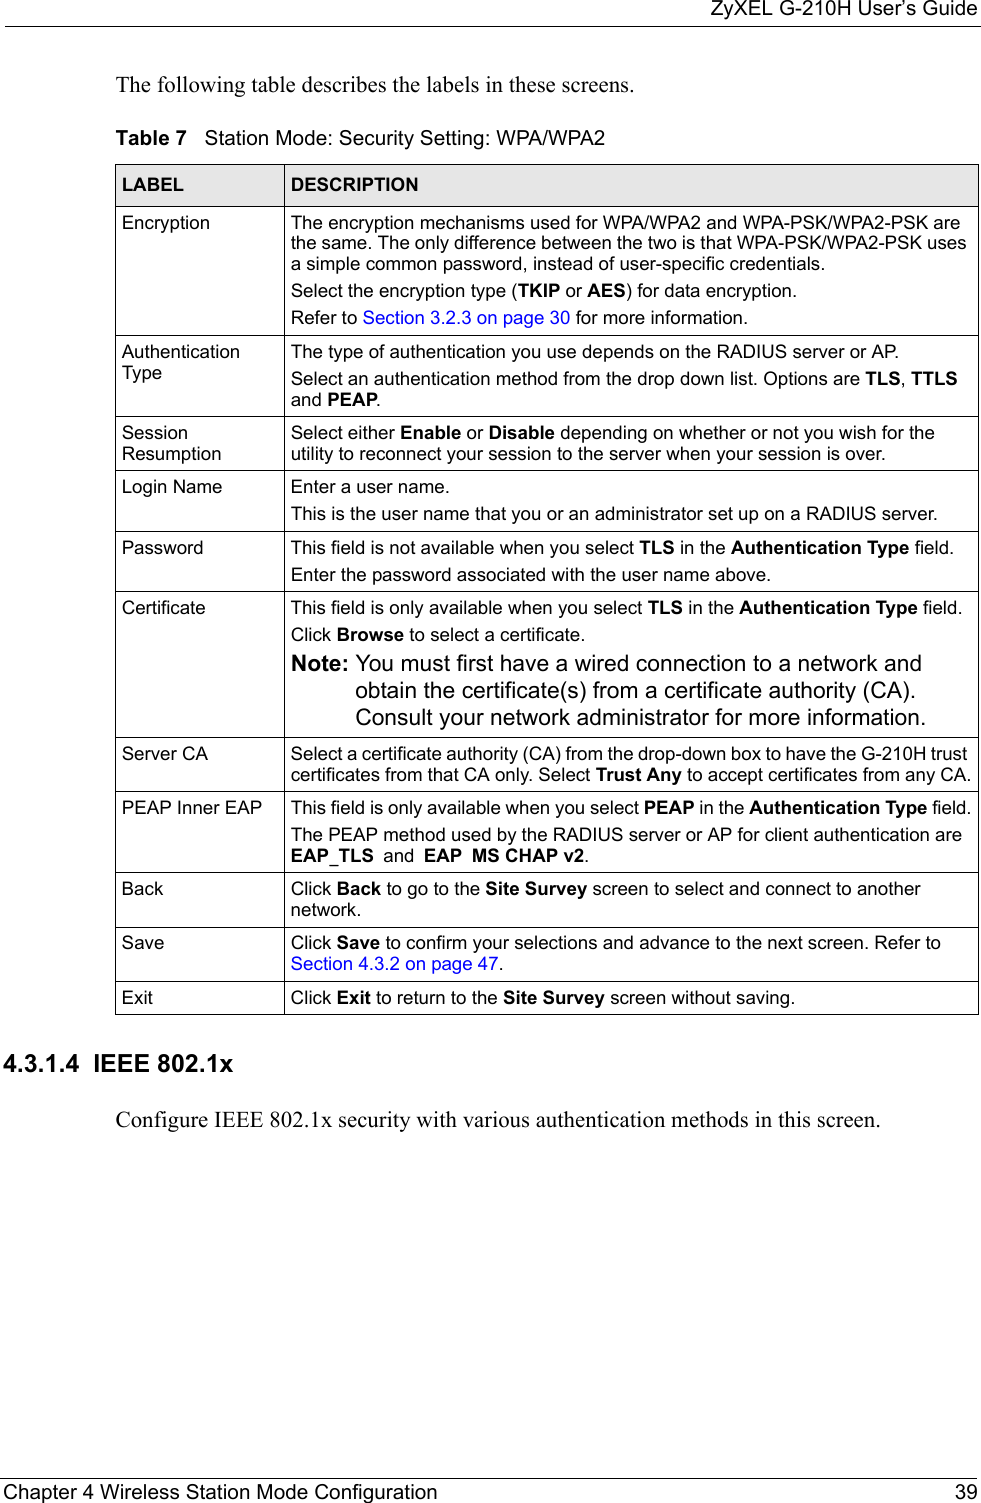 ZyXEL G-210H User’s GuideChapter 4 Wireless Station Mode Configuration 39The following table describes the labels in these screens. 4.3.1.4  IEEE 802.1xConfigure IEEE 802.1x security with various authentication methods in this screen. Table 7   Station Mode: Security Setting: WPA/WPA2LABEL DESCRIPTIONEncryption The encryption mechanisms used for WPA/WPA2 and WPA-PSK/WPA2-PSK are the same. The only difference between the two is that WPA-PSK/WPA2-PSK uses a simple common password, instead of user-specific credentials.Select the encryption type (TKIP or AES) for data encryption.Refer to Section 3.2.3 on page 30 for more information.Authentication TypeThe type of authentication you use depends on the RADIUS server or AP.Select an authentication method from the drop down list. Options are TLS, TTLS and PEAP.Session ResumptionSelect either Enable or Disable depending on whether or not you wish for the utility to reconnect your session to the server when your session is over.Login Name Enter a user name. This is the user name that you or an administrator set up on a RADIUS server.Password This field is not available when you select TLS in the Authentication Type field. Enter the password associated with the user name above. Certificate This field is only available when you select TLS in the Authentication Type field. Click Browse to select a certificate.Note: You must first have a wired connection to a network and obtain the certificate(s) from a certificate authority (CA). Consult your network administrator for more information.Server CA Select a certificate authority (CA) from the drop-down box to have the G-210H trust certificates from that CA only. Select Trust Any to accept certificates from any CA.PEAP Inner EAP This field is only available when you select PEAP in the Authentication Type field.The PEAP method used by the RADIUS server or AP for client authentication are EAP_TLS and EAP MS CHAP v2.Back Click Back to go to the Site Survey screen to select and connect to another network.Save Click Save to confirm your selections and advance to the next screen. Refer to Section 4.3.2 on page 47. Exit Click Exit to return to the Site Survey screen without saving.